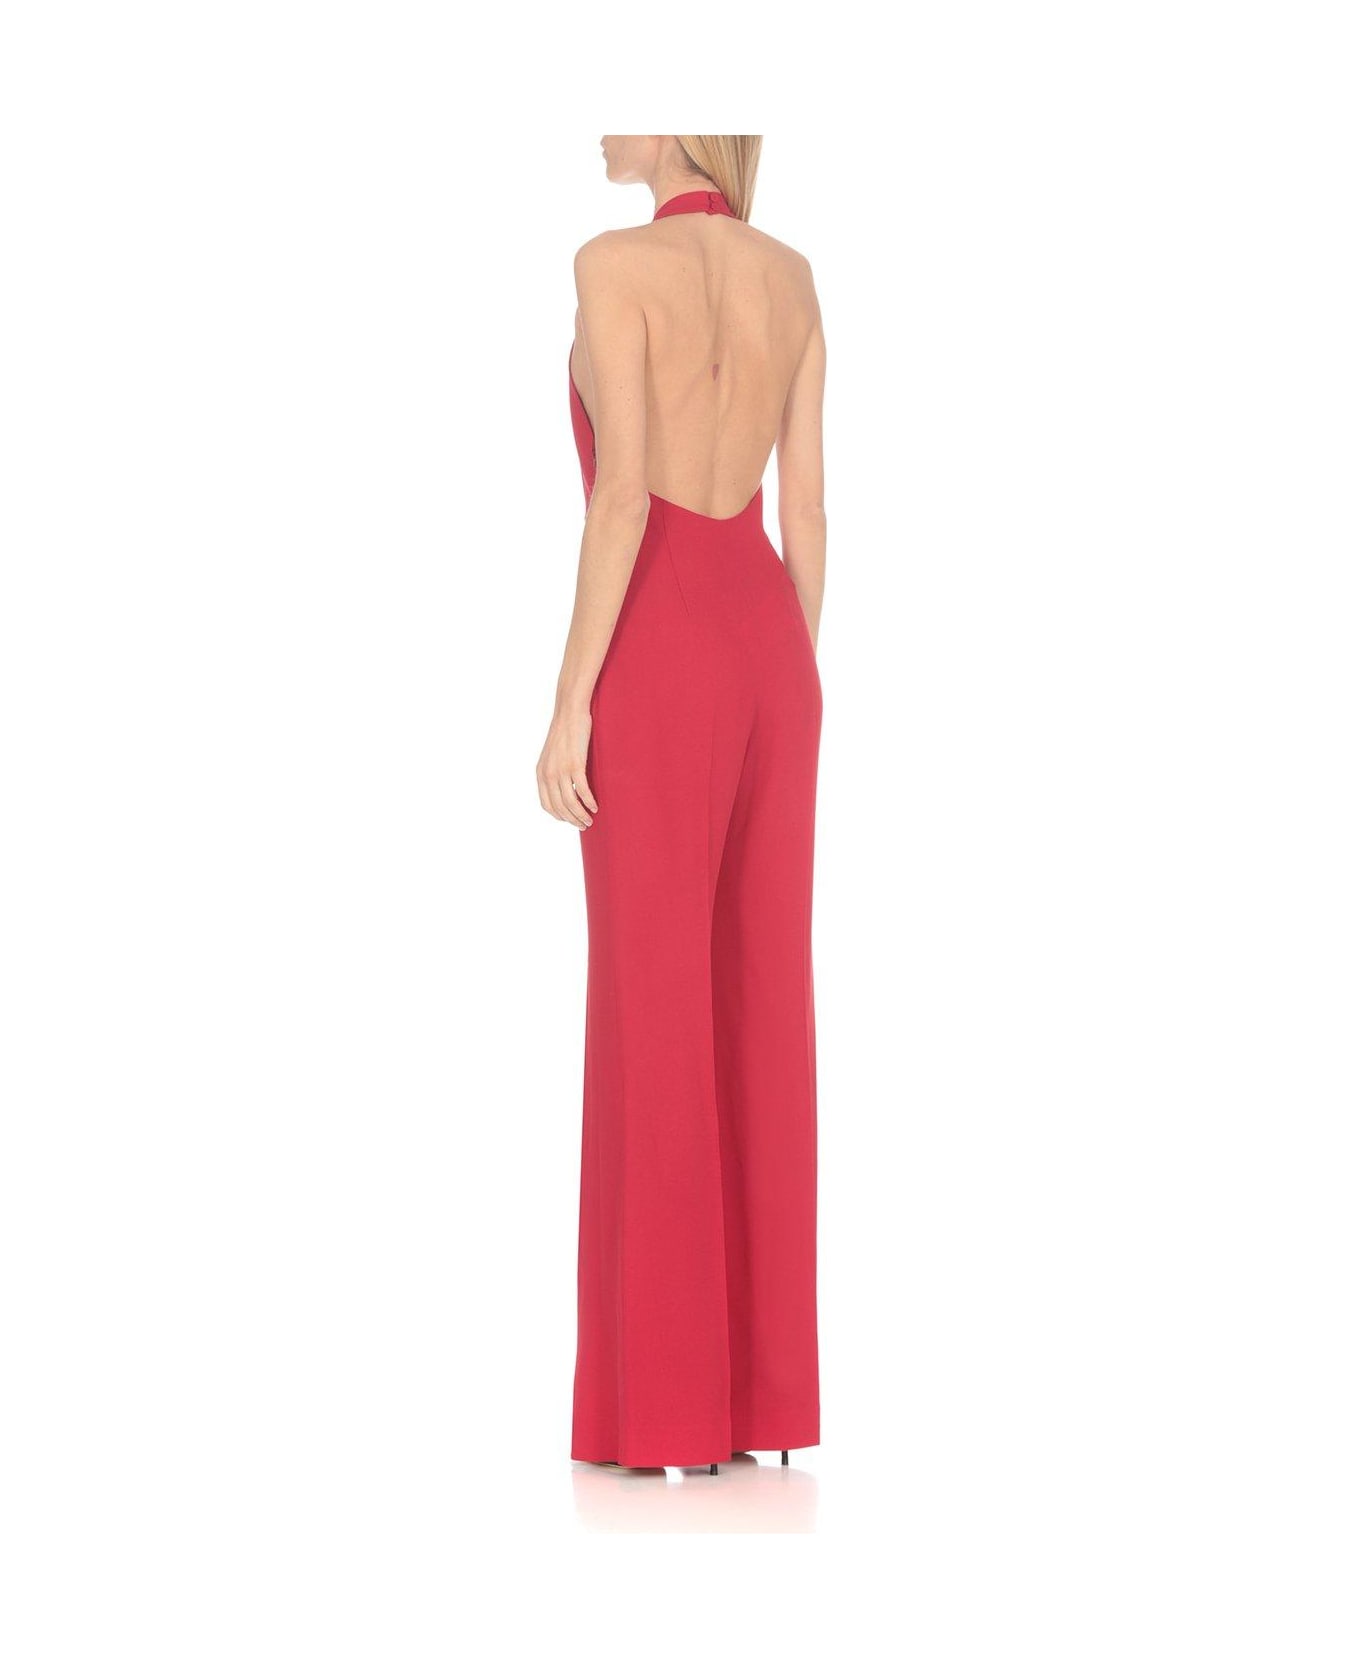 Moschino Chain-embellished Open-back Haltrneck Jumpsuit Moschino - RED